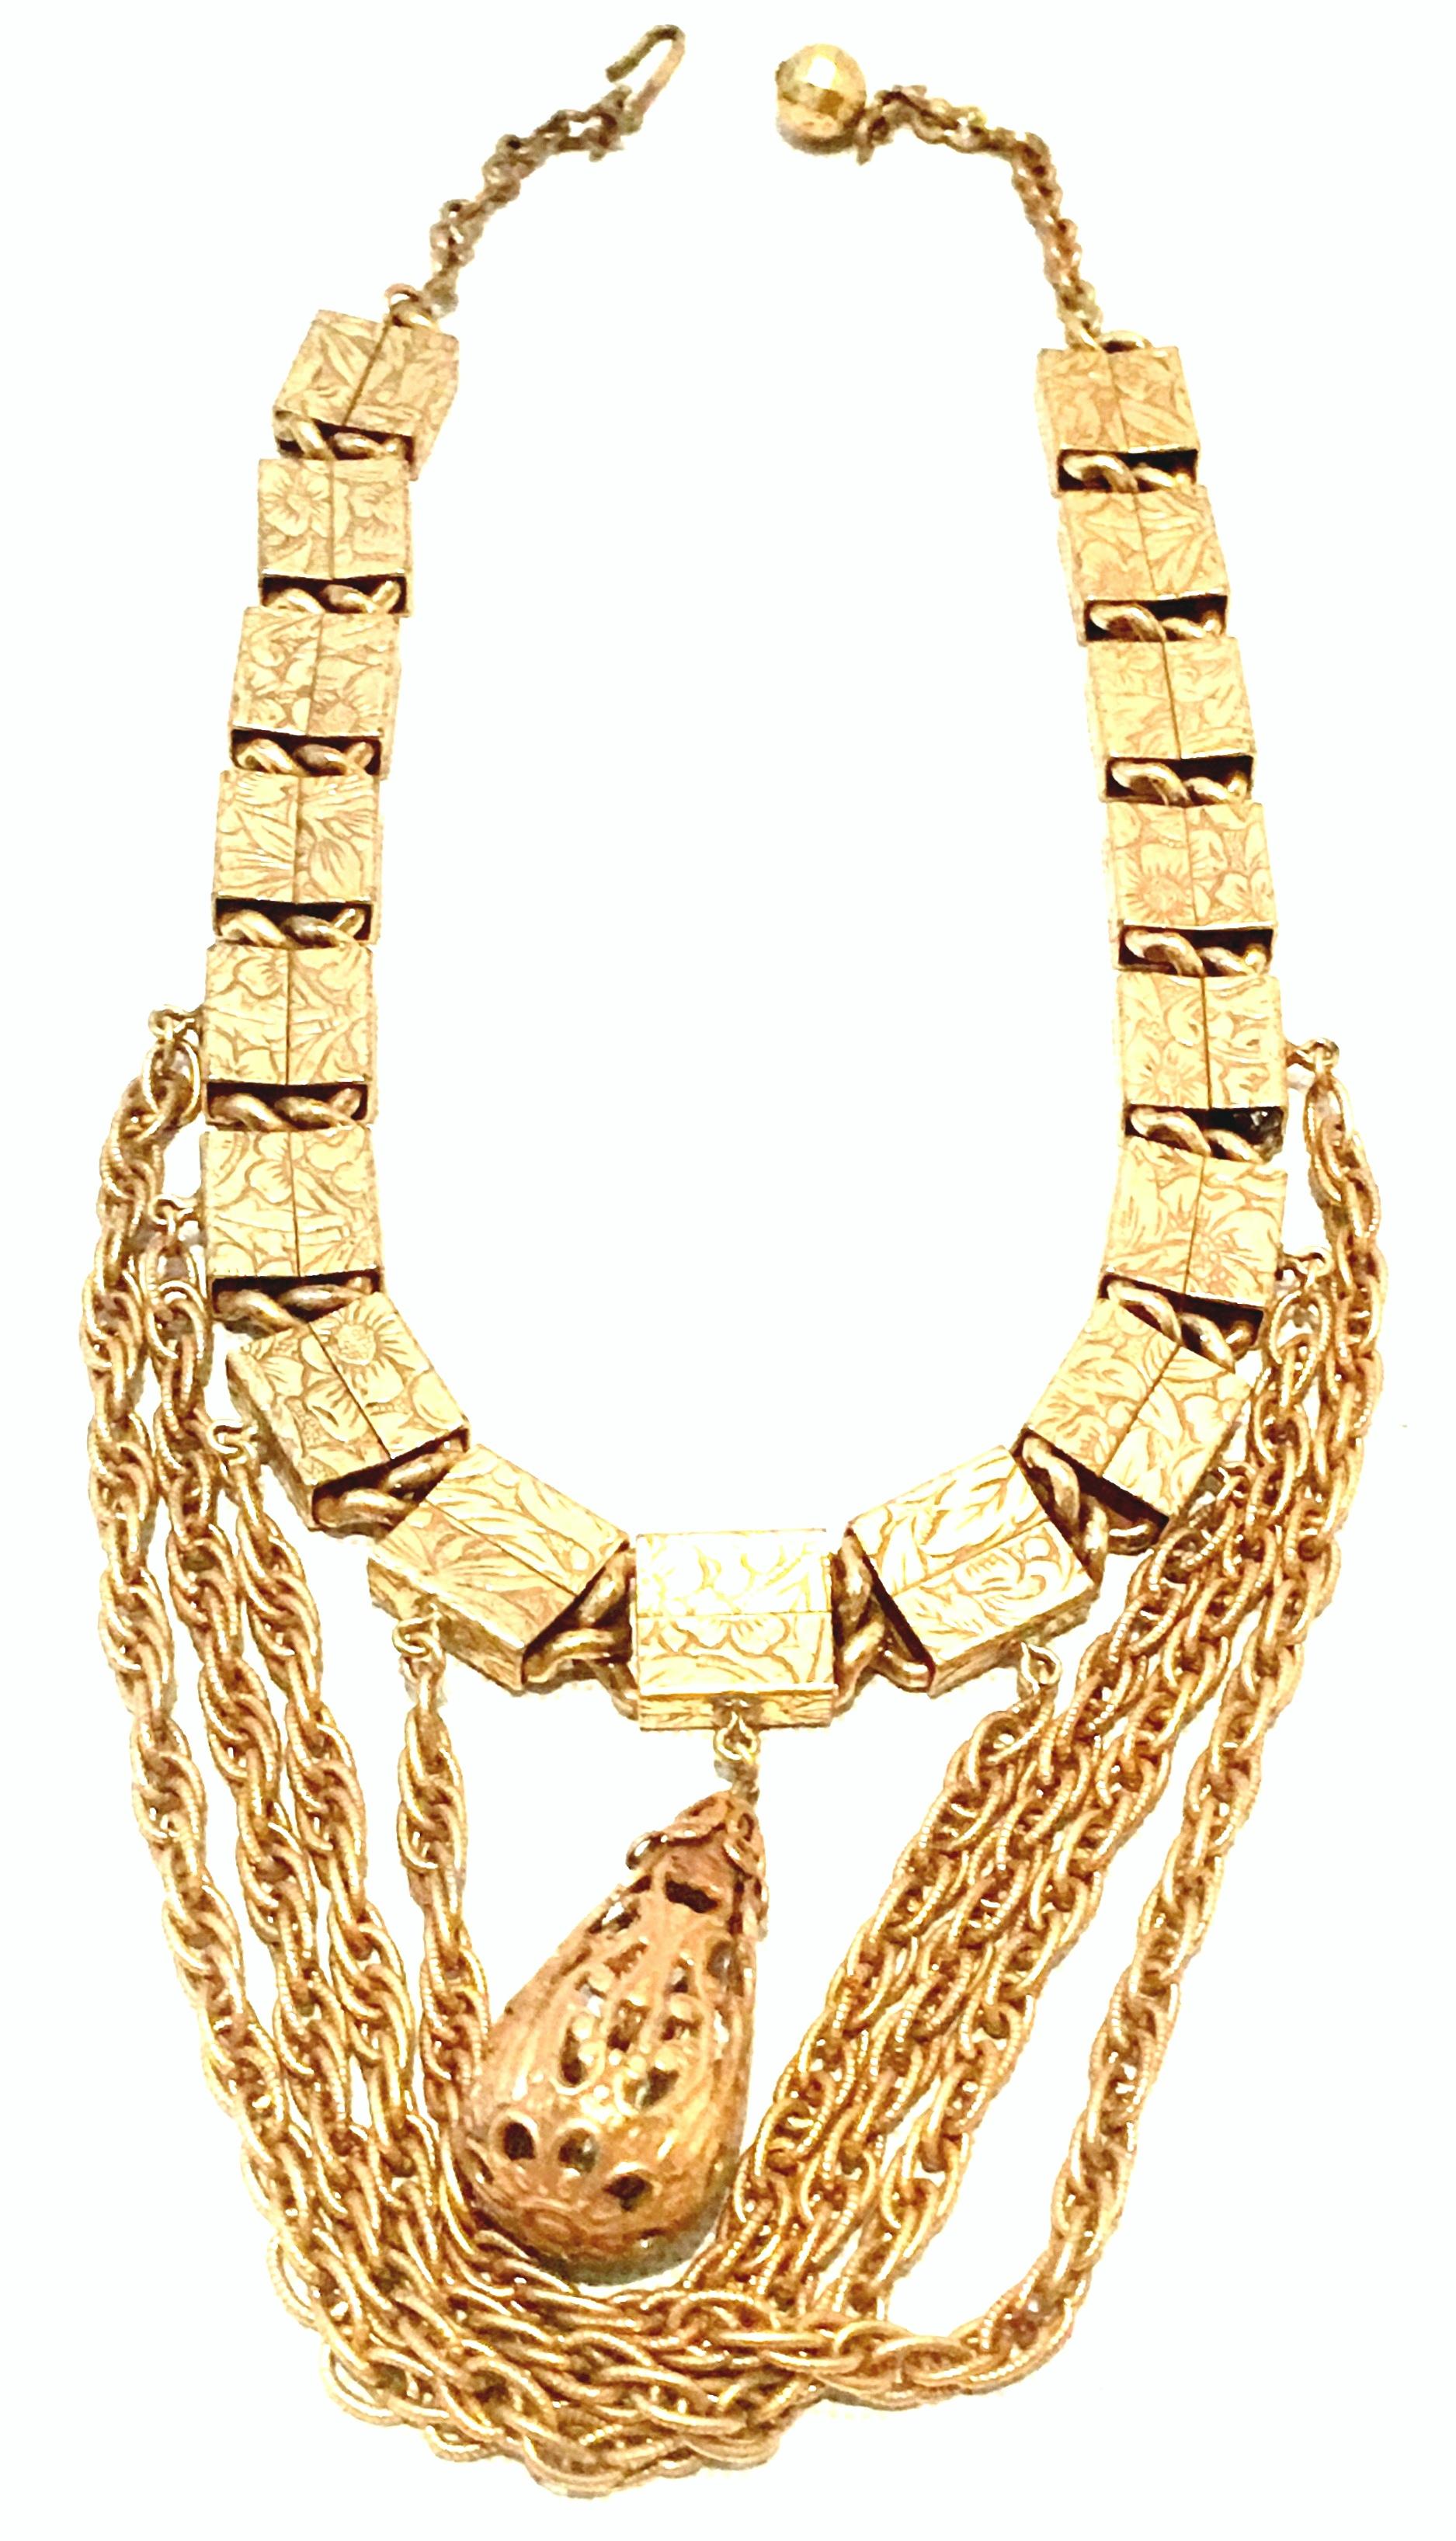 20th Century Art Nouveau Gold Book Chain Choker Style Necklace & Earrings S/3 For Sale 5